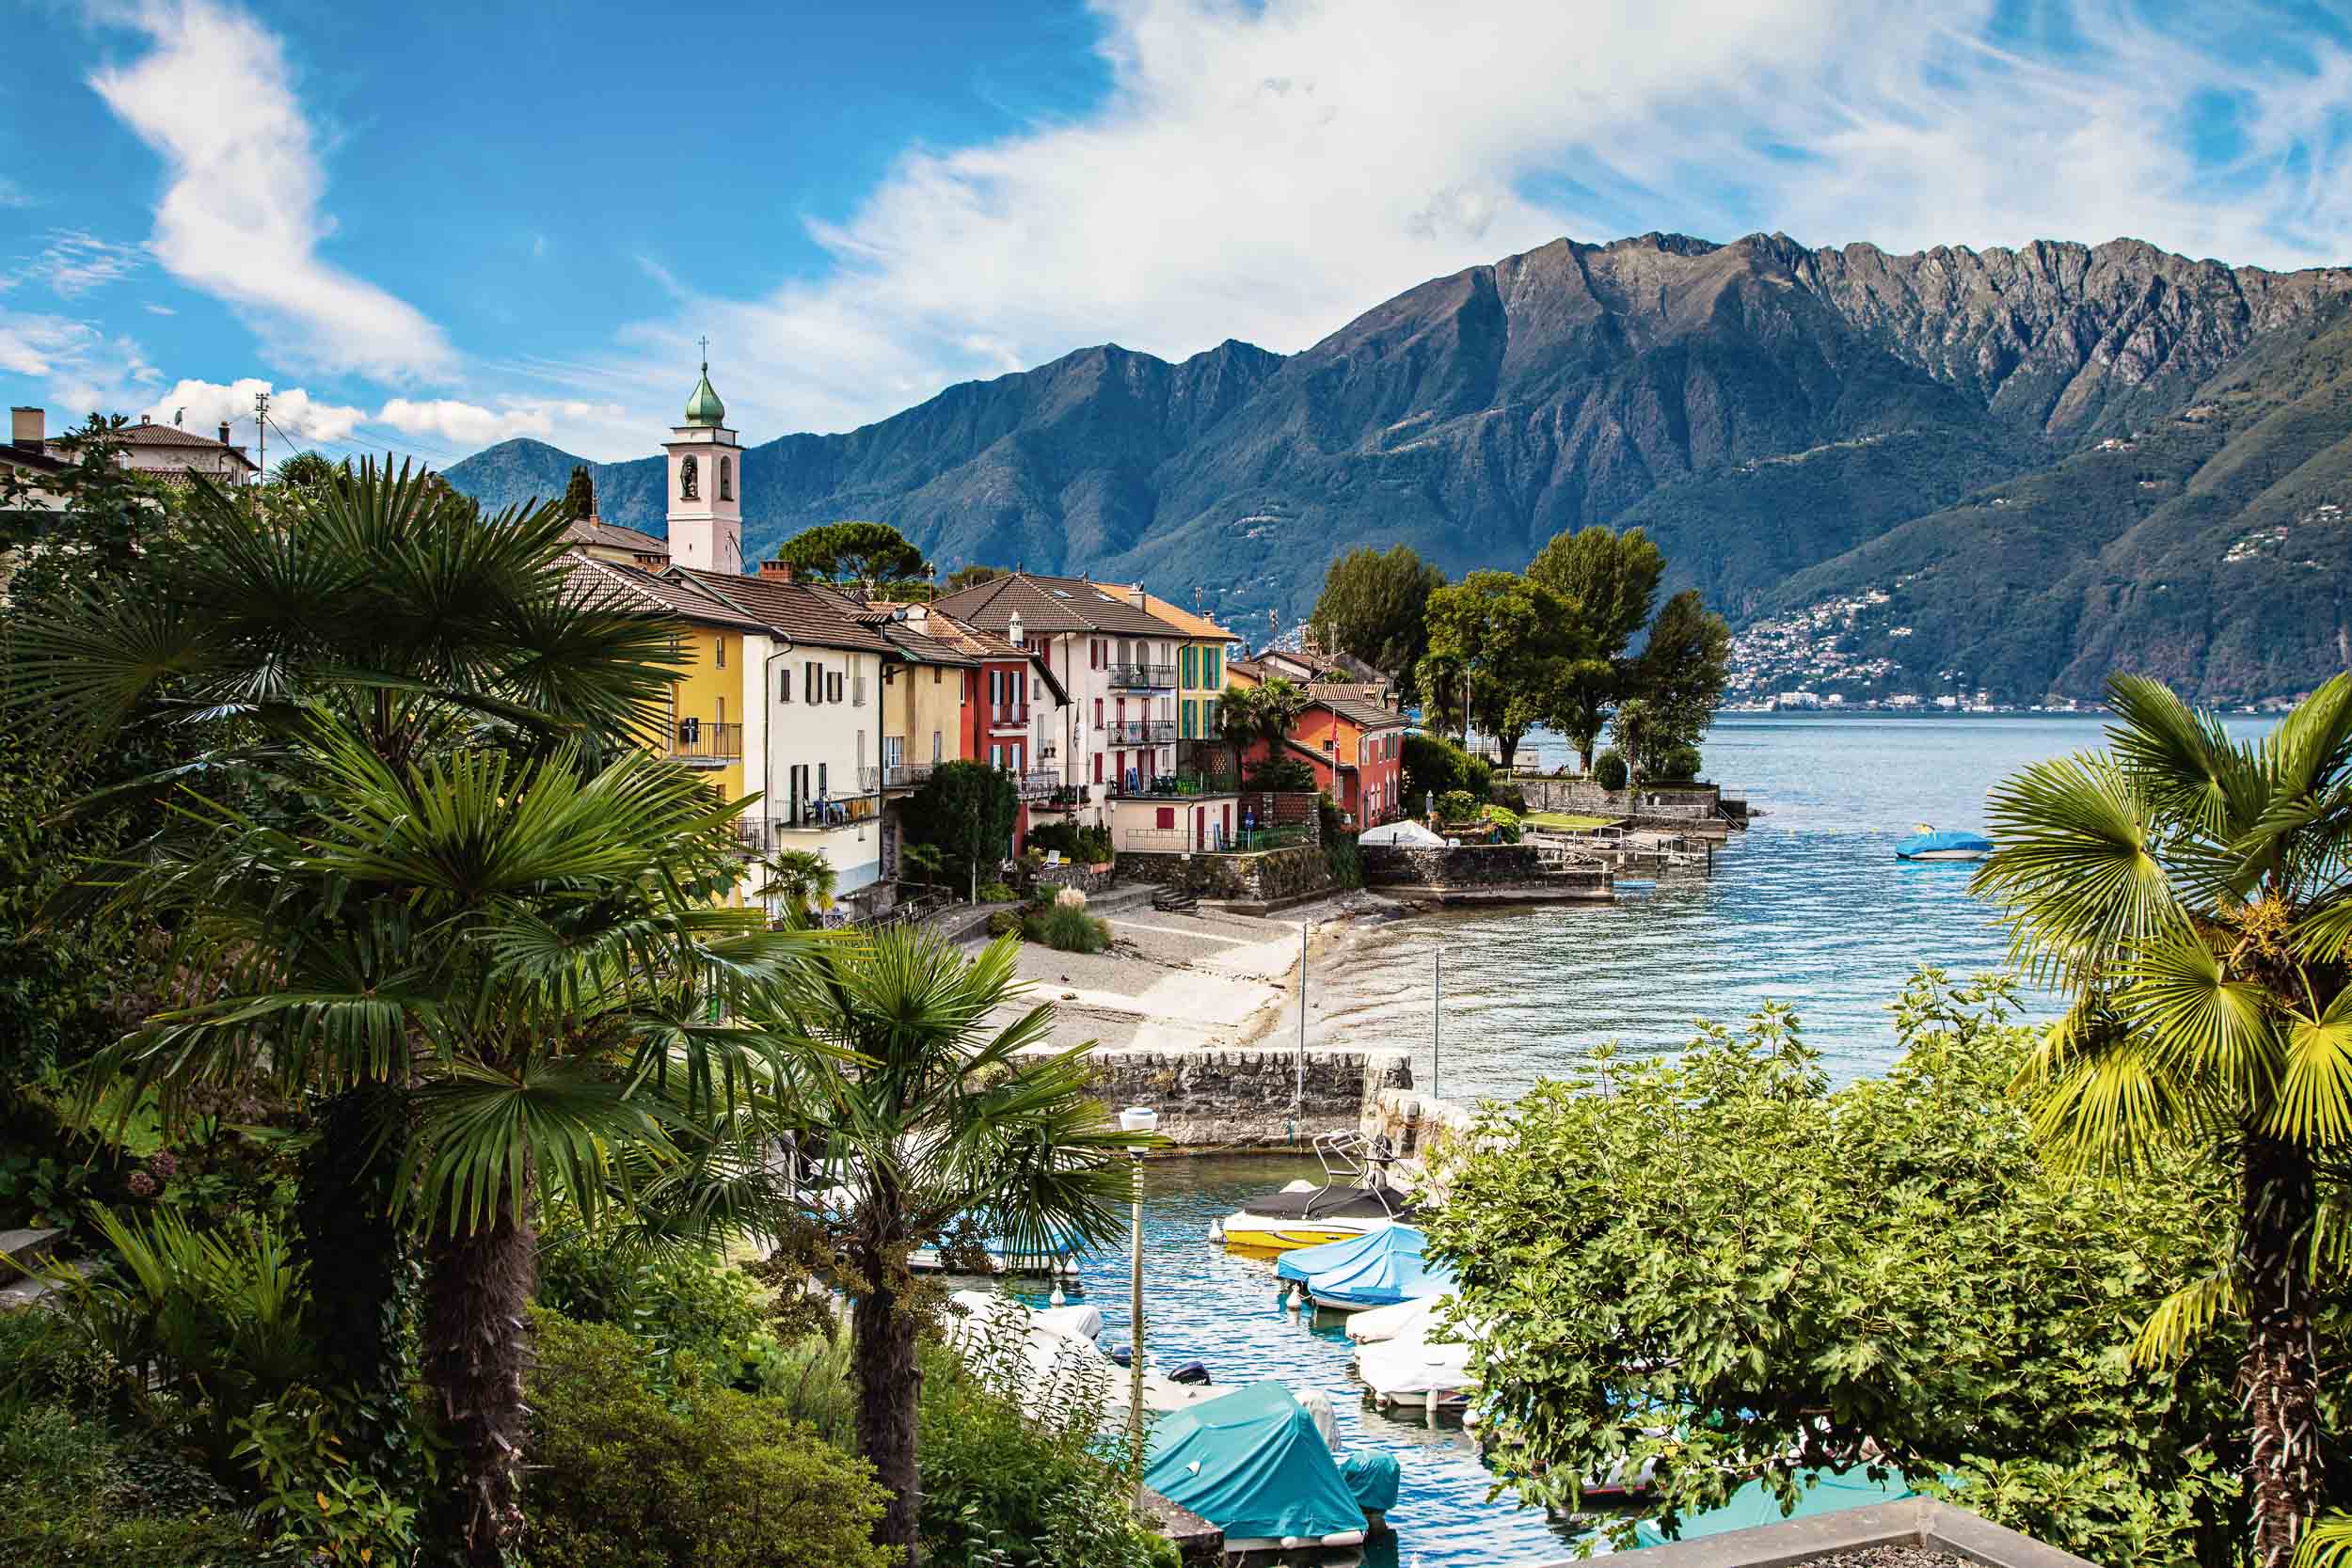 Small harbor with colorful row of houses on Lake Maggiore, Gerra (Gambarogno). Copyright by: Switzerland Tourism